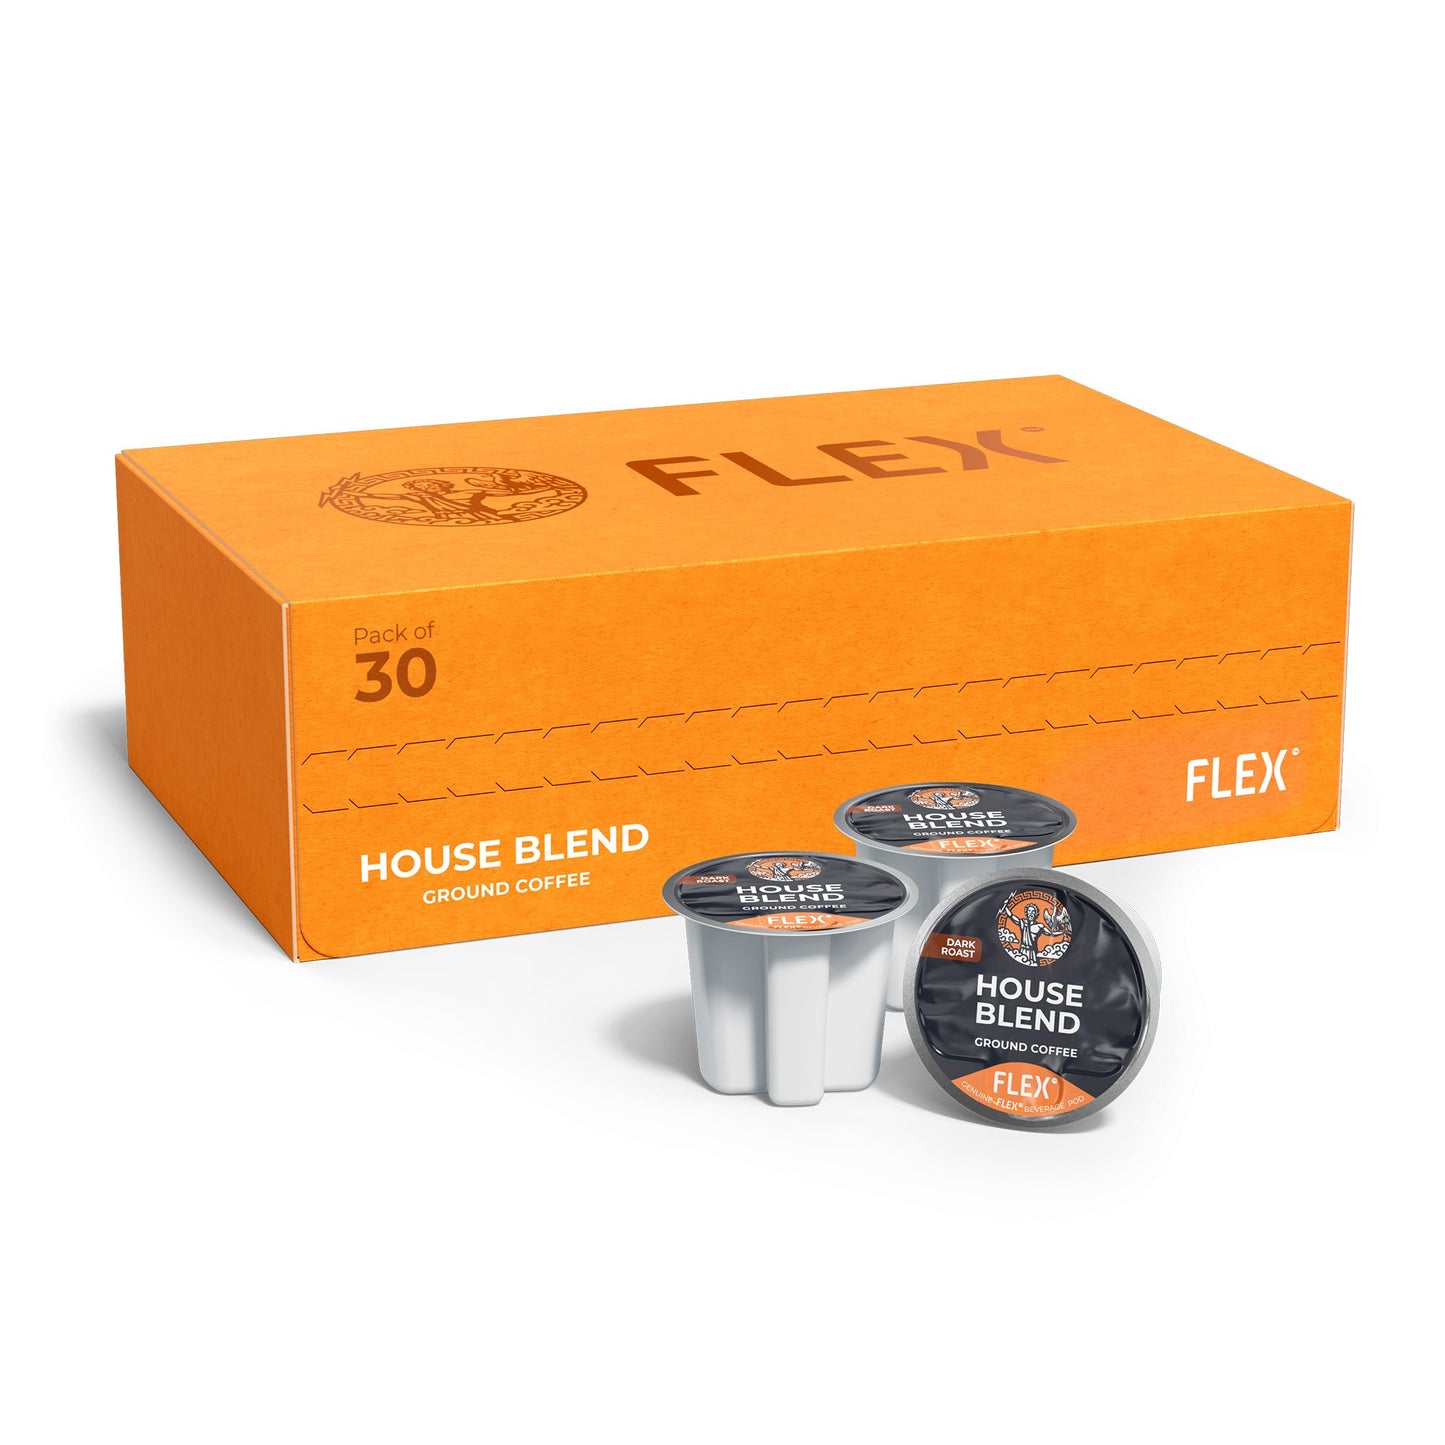 Box of 30 FLEXFUEL™ House Blend Dark Roast Ground Coffee pods, depicted with a rich dark grey color theme, a red 'DARK ROAST' tag, and the emblematic FLEX logo featuring Zeus and an eagle.